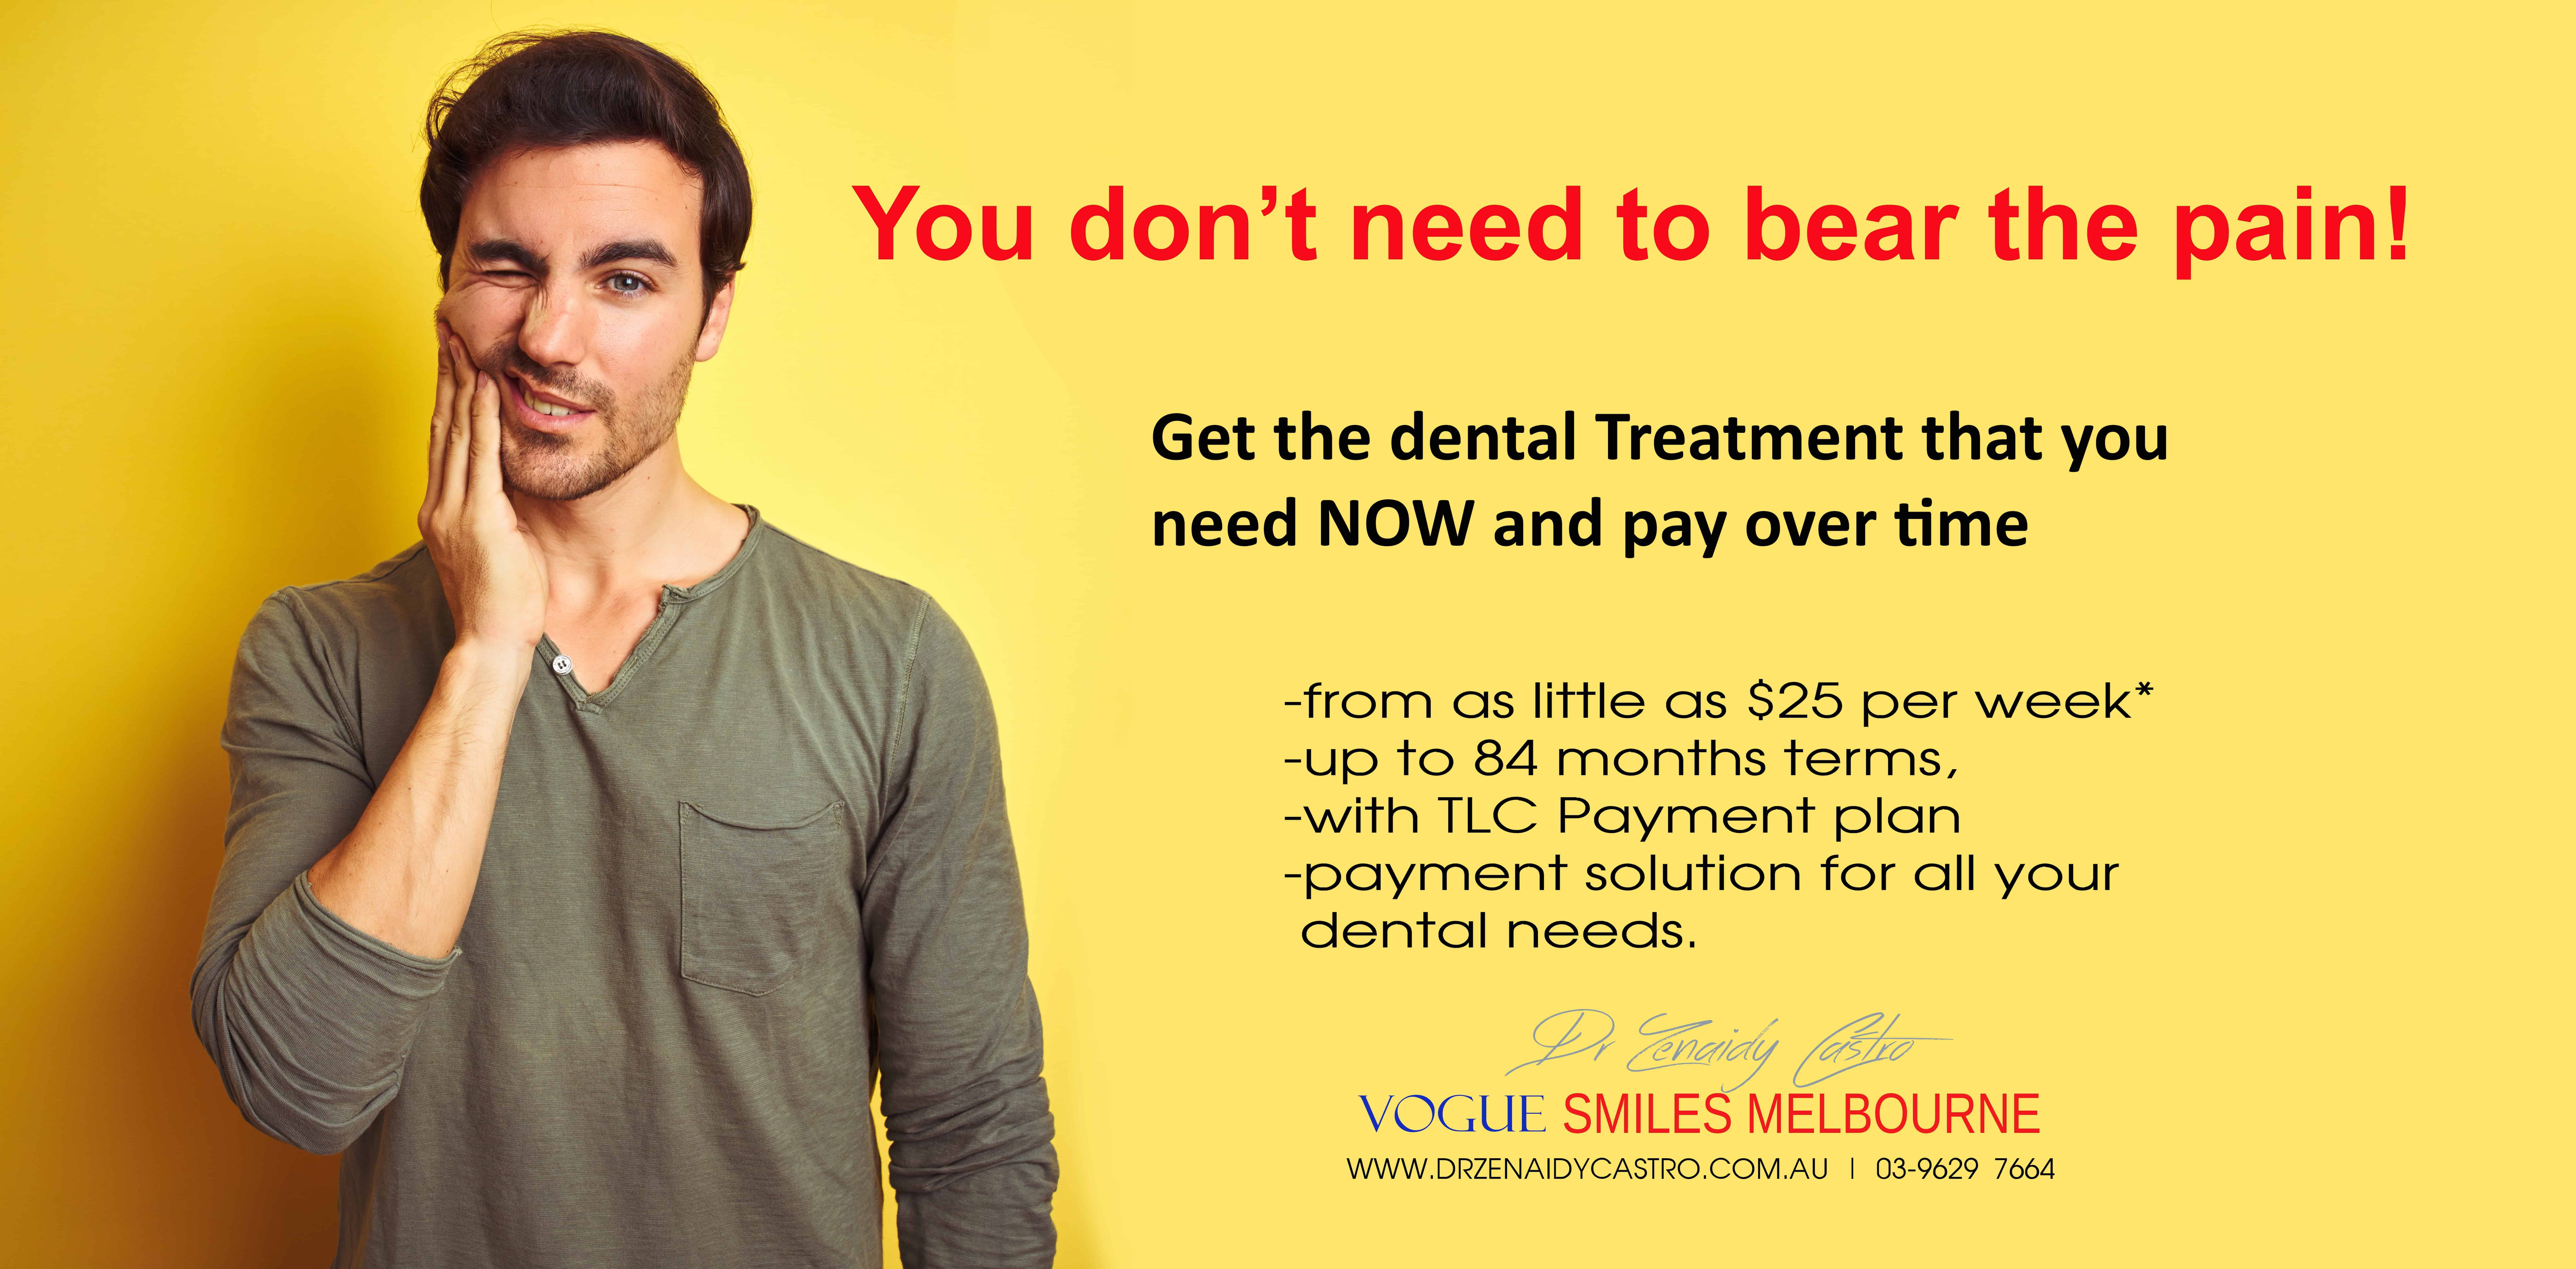 Tooth Decay Treatment Melbourne CBD - Best General Dentist in Melbourne CBD